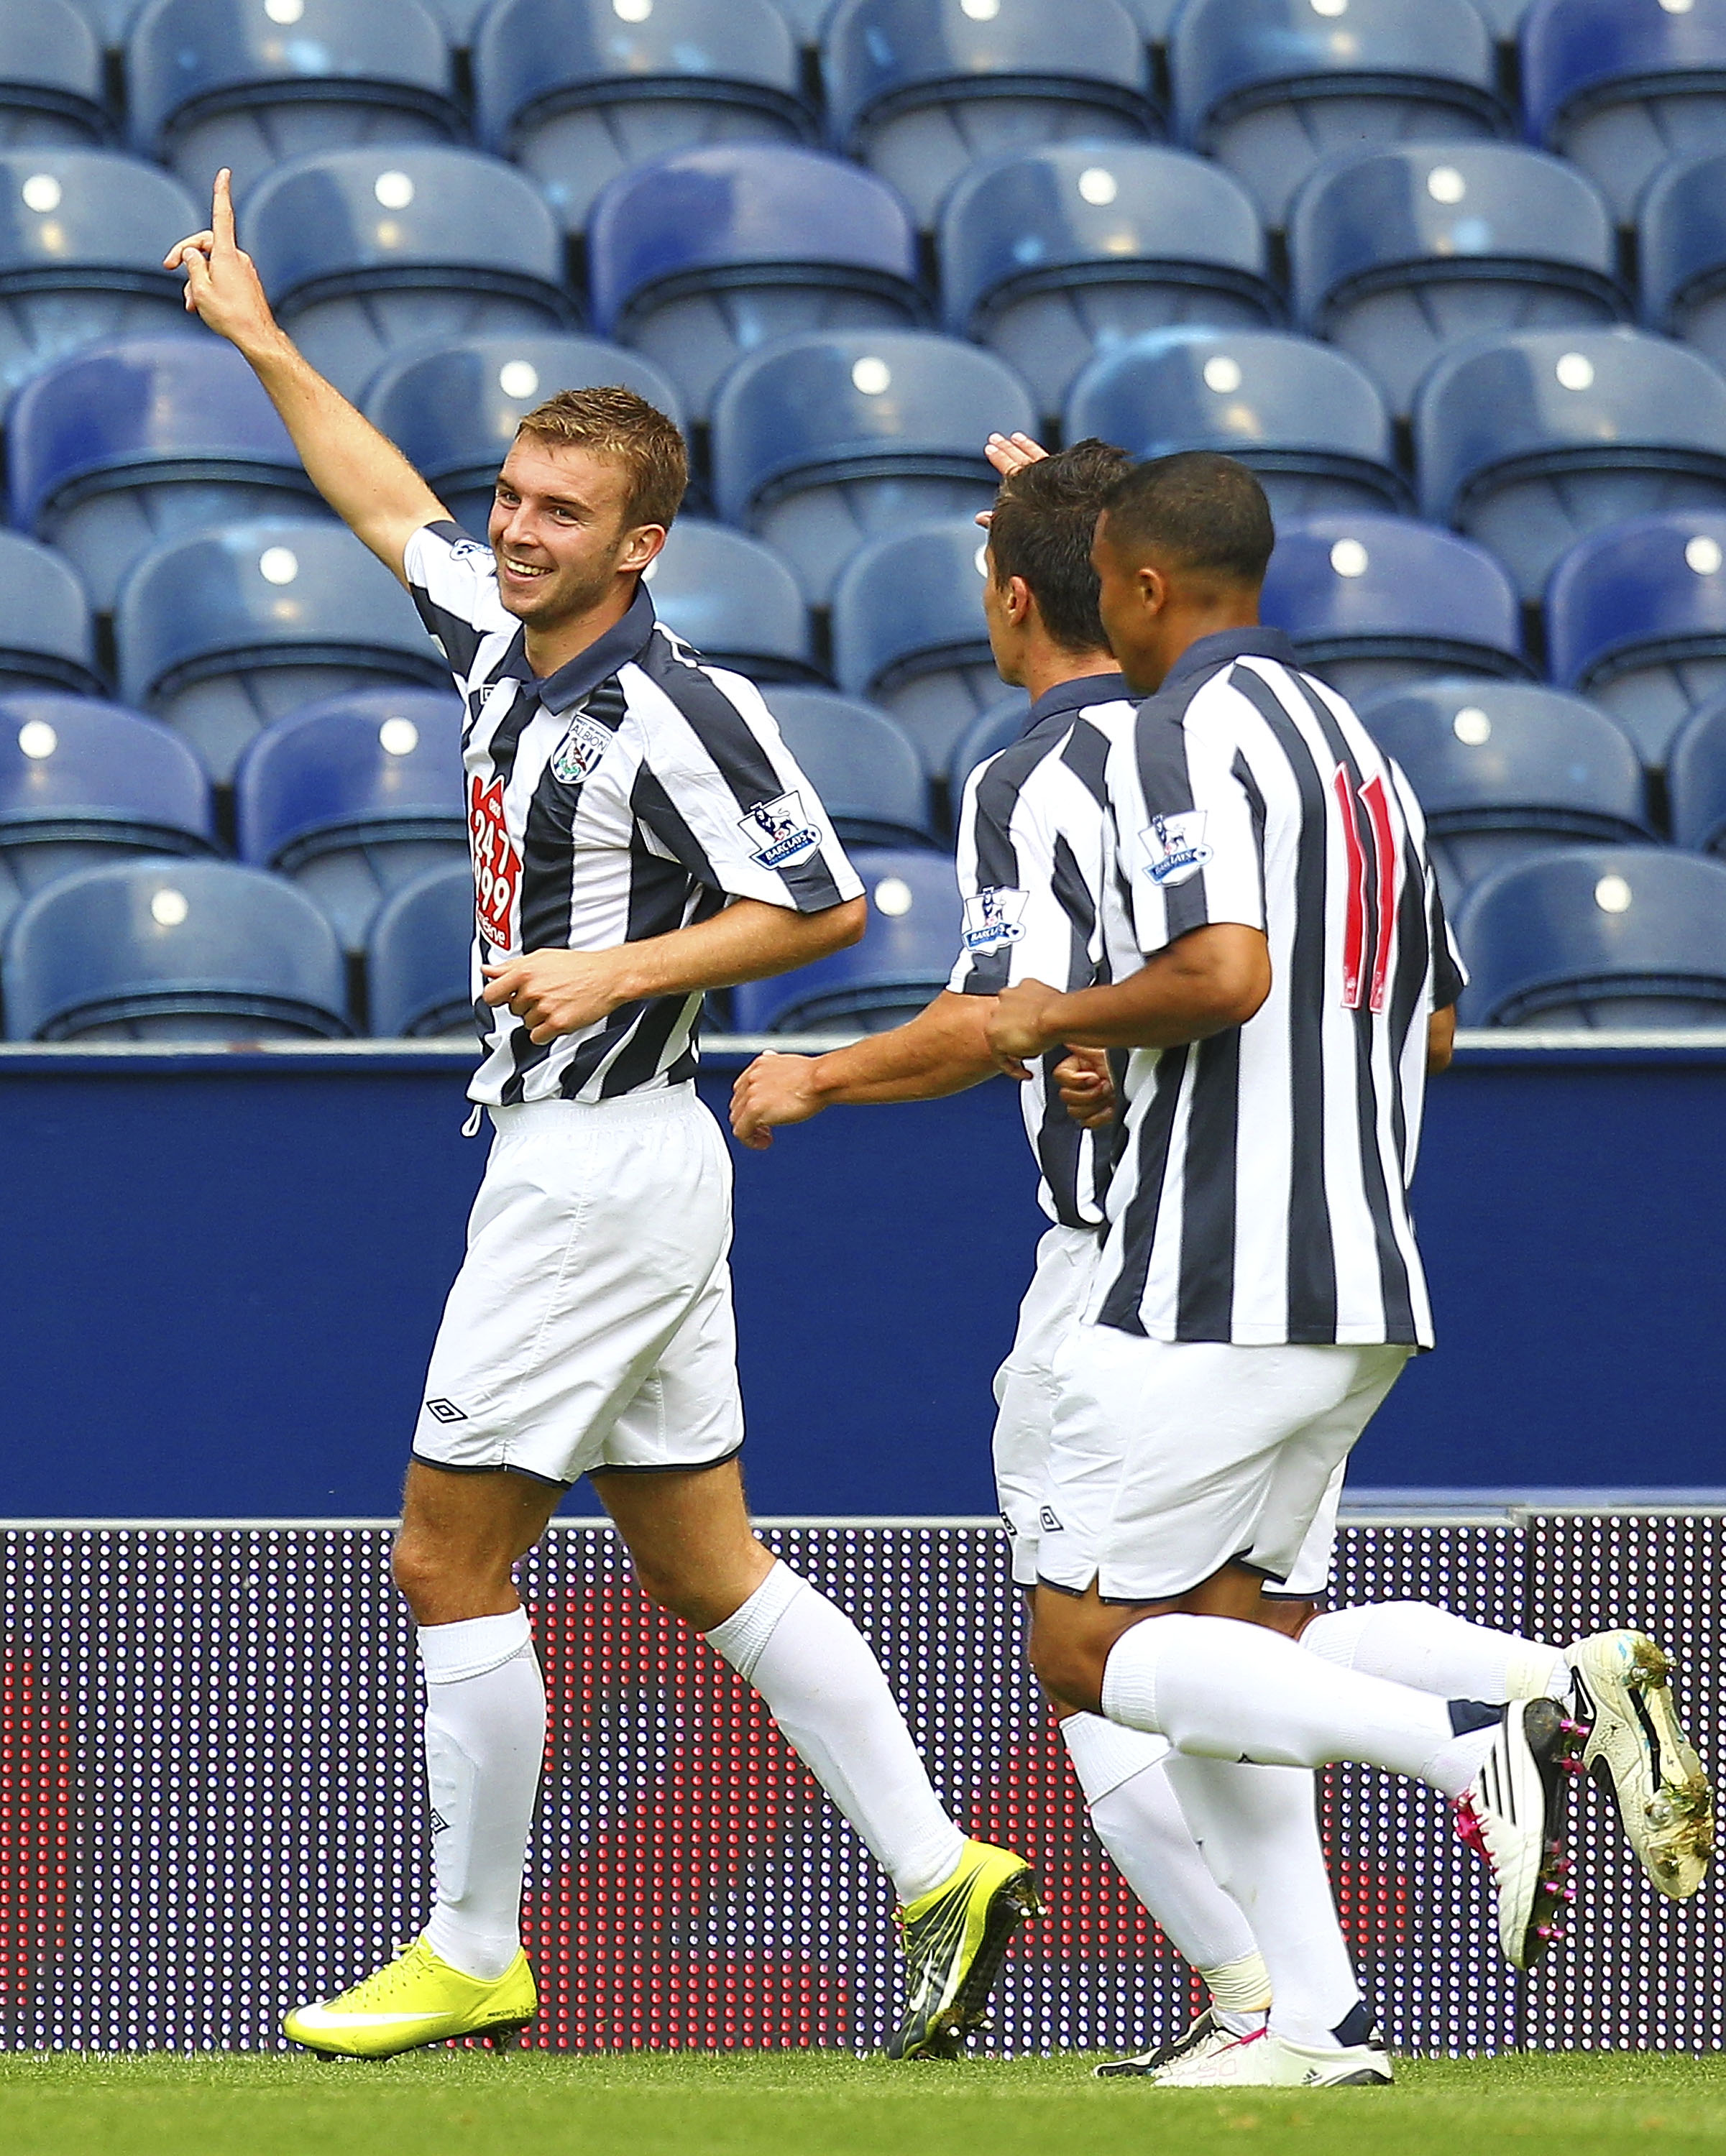 WEST BROMWICH, ENGLAND - AUGUST 07: James Morrison (L) of West Bromwich Albion celebrates his goal during the pre season friendly match between West Bromwich Albion and Osasuna at The Hawthorns on August 07, 2010 in West Bromwich, England. (Photo by Tom D